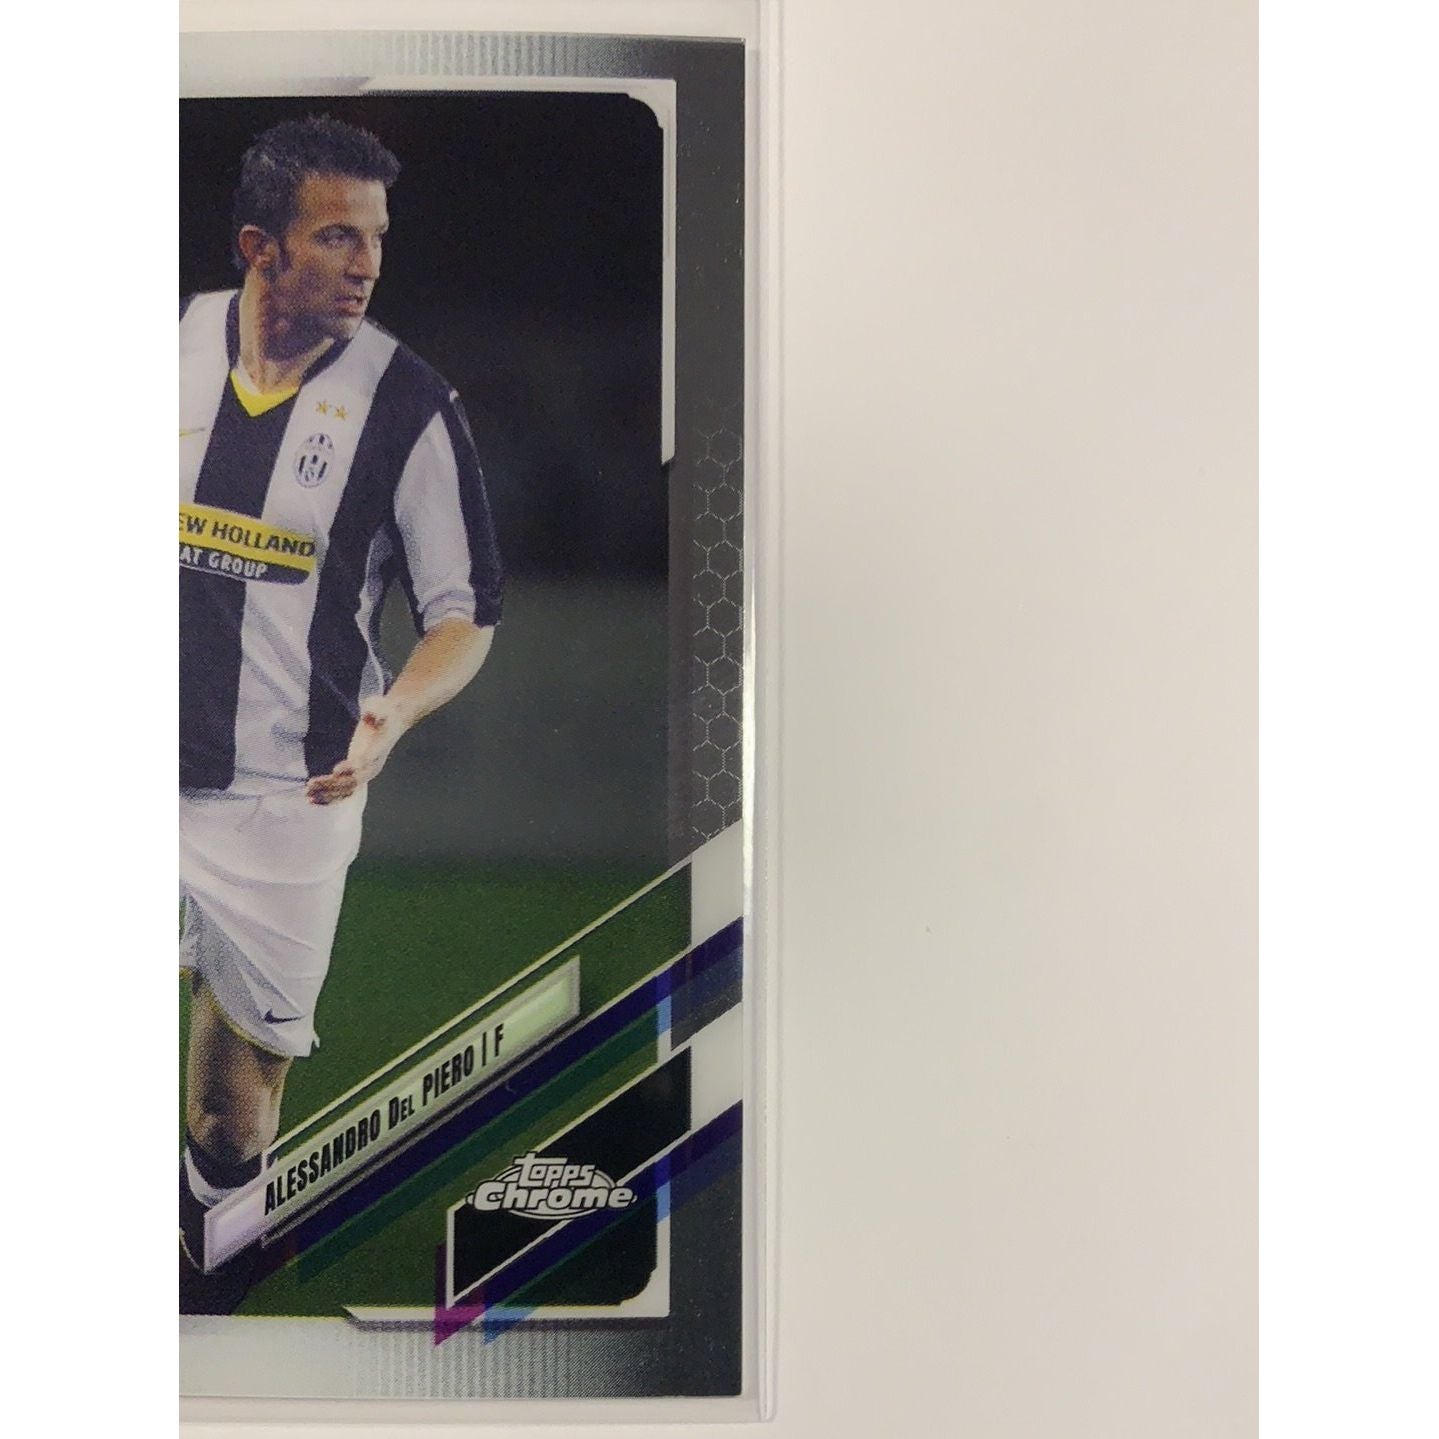  2021 Topps Chrome UEFA Champions League Alessandro Del Piero Base #14  Local Legends Cards & Collectibles